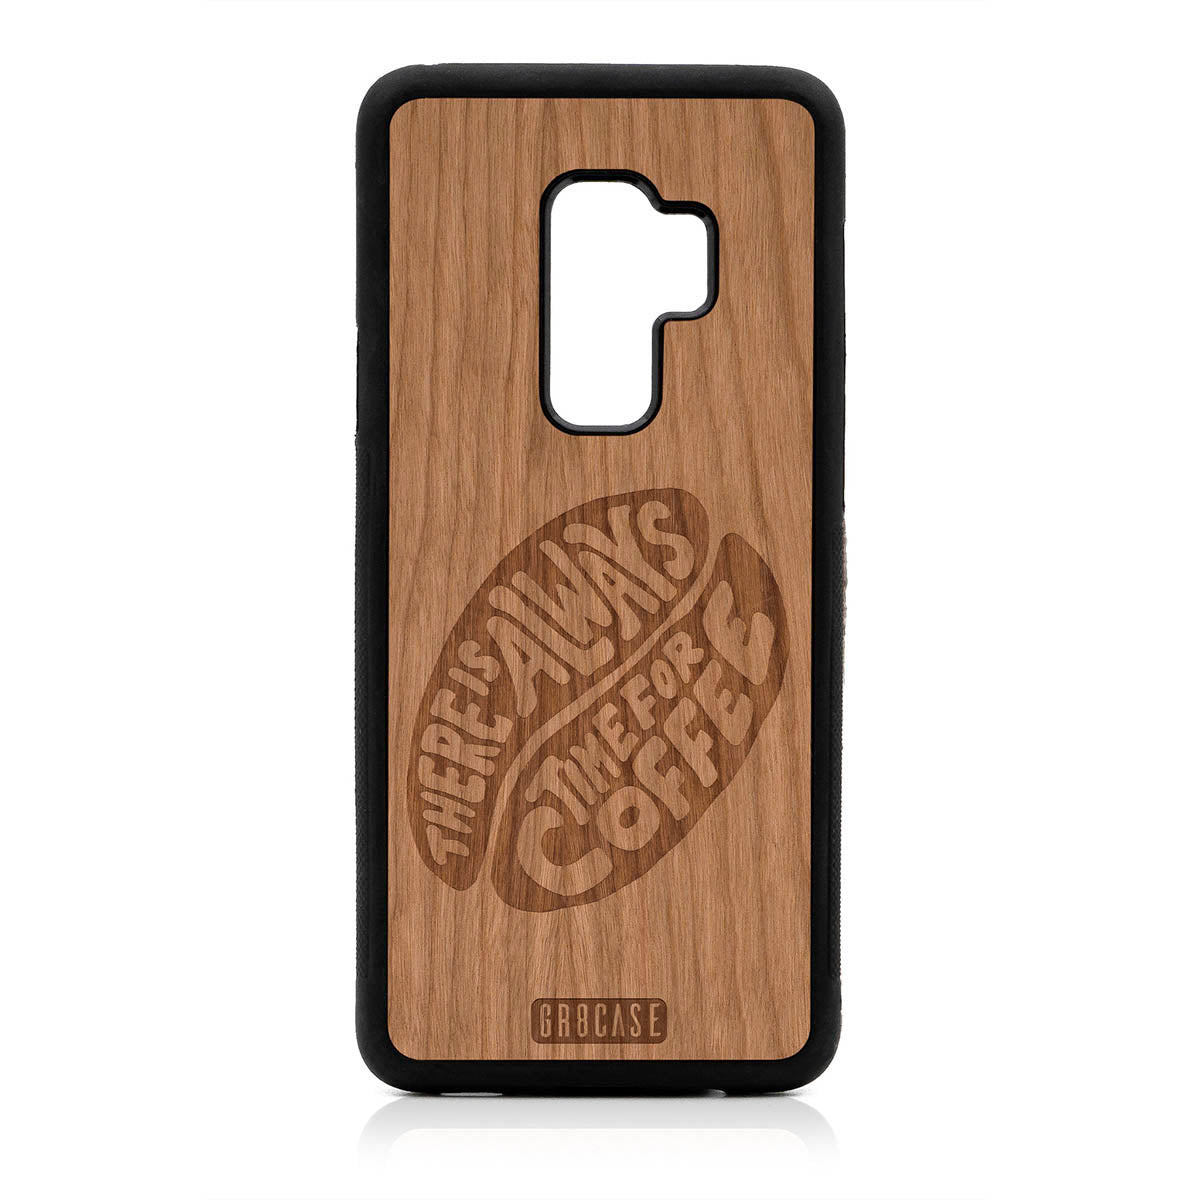 There Is Always Time For Coffee Design Wood Case For Samsung Galaxy S9 Plus